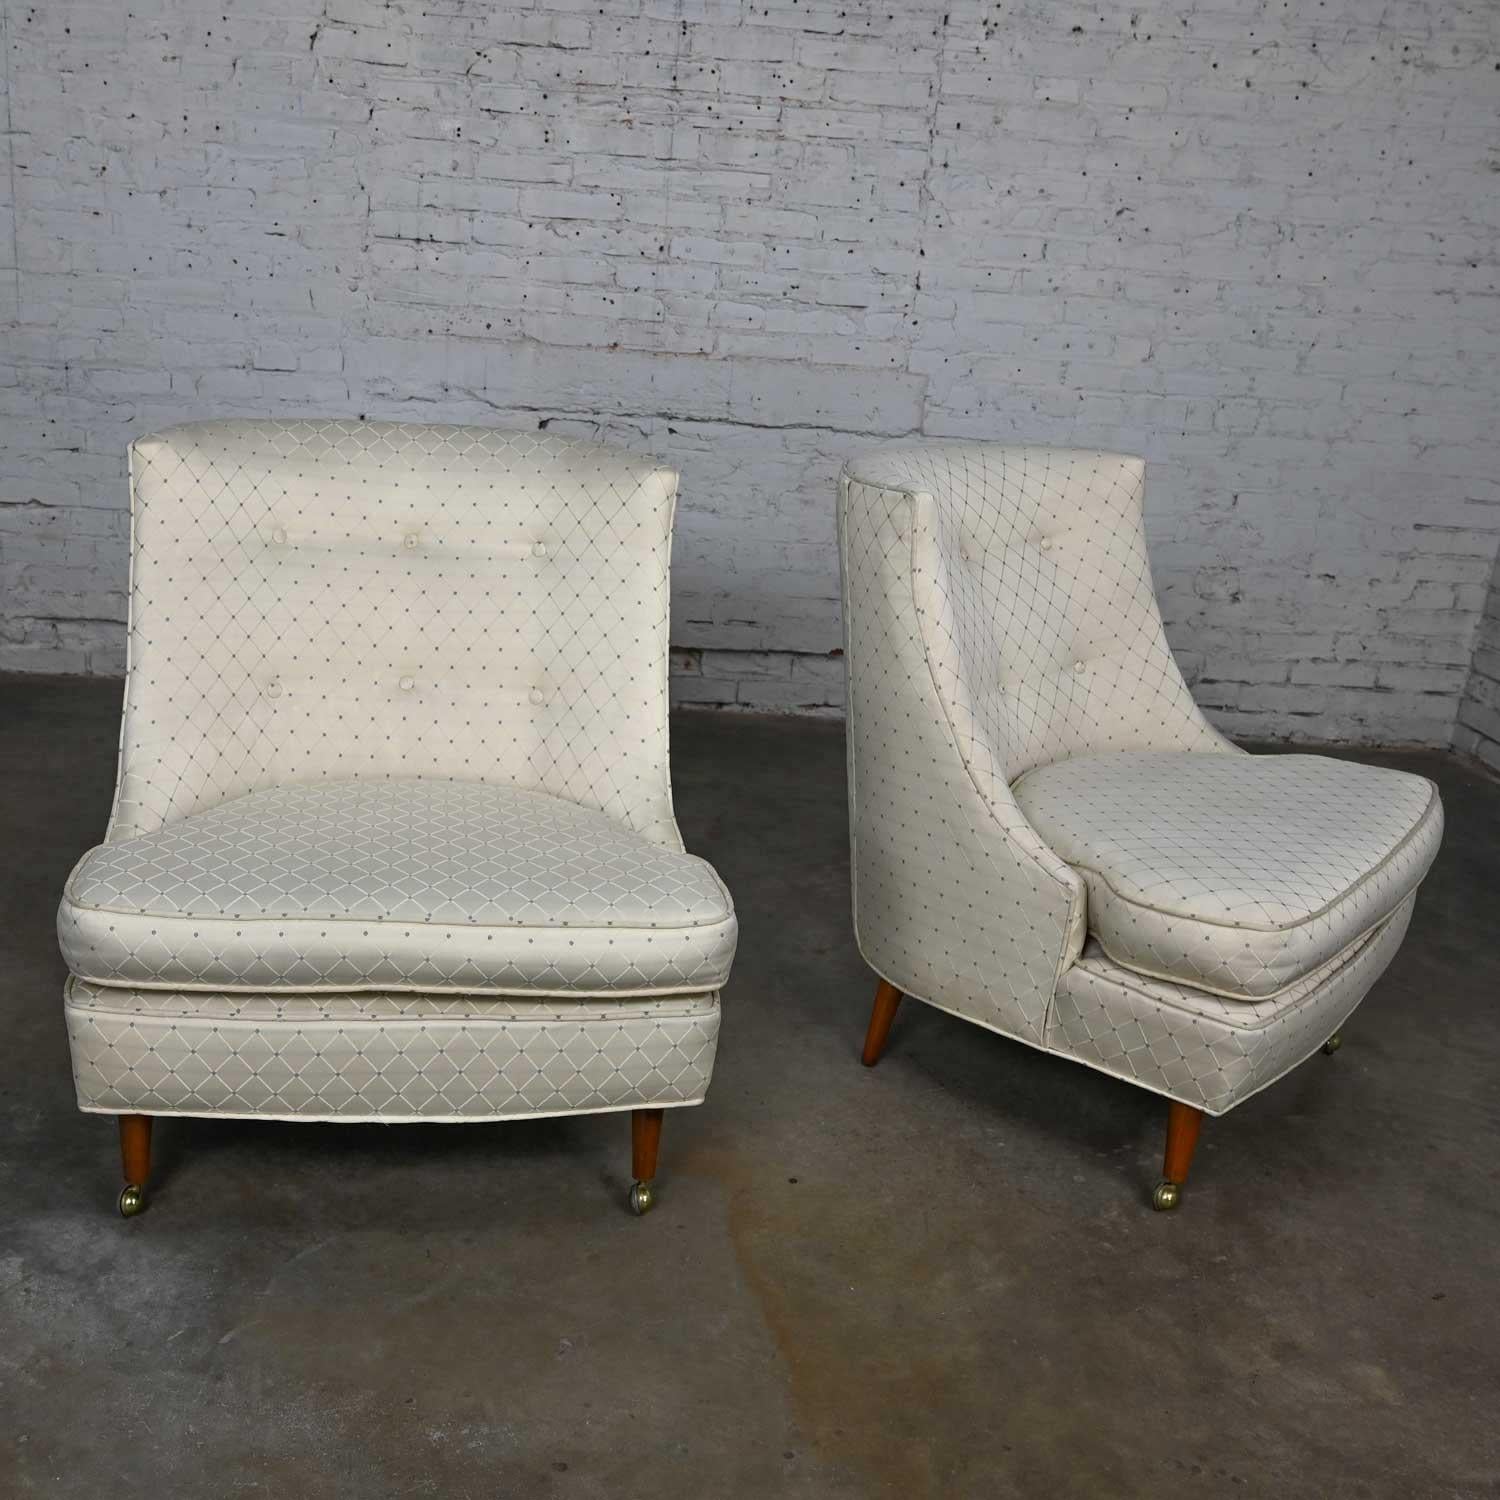 Gorgeous vintage MCM aka Mid-Century Modern or Hollywood Regency button back oyster & blue colored harlequin fabric slipper chairs with front brass ball casters. Beautiful condition, keeping in mind that these are vintage and not new so will have